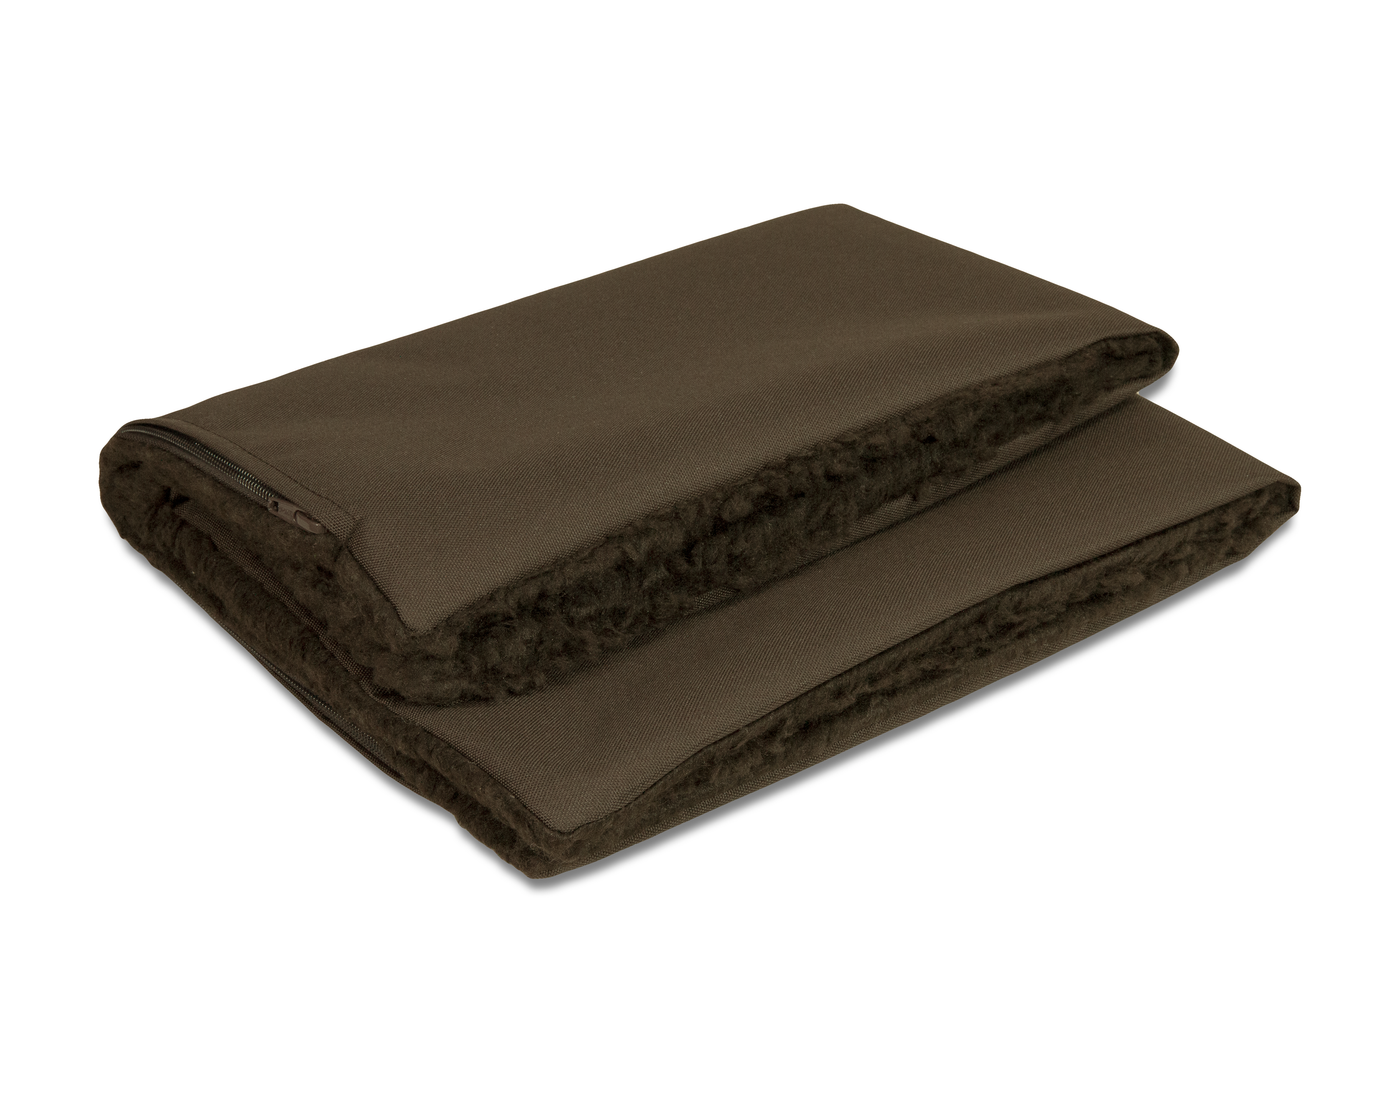 Rectangular removable dog bed waterproof in brown inner cover spare